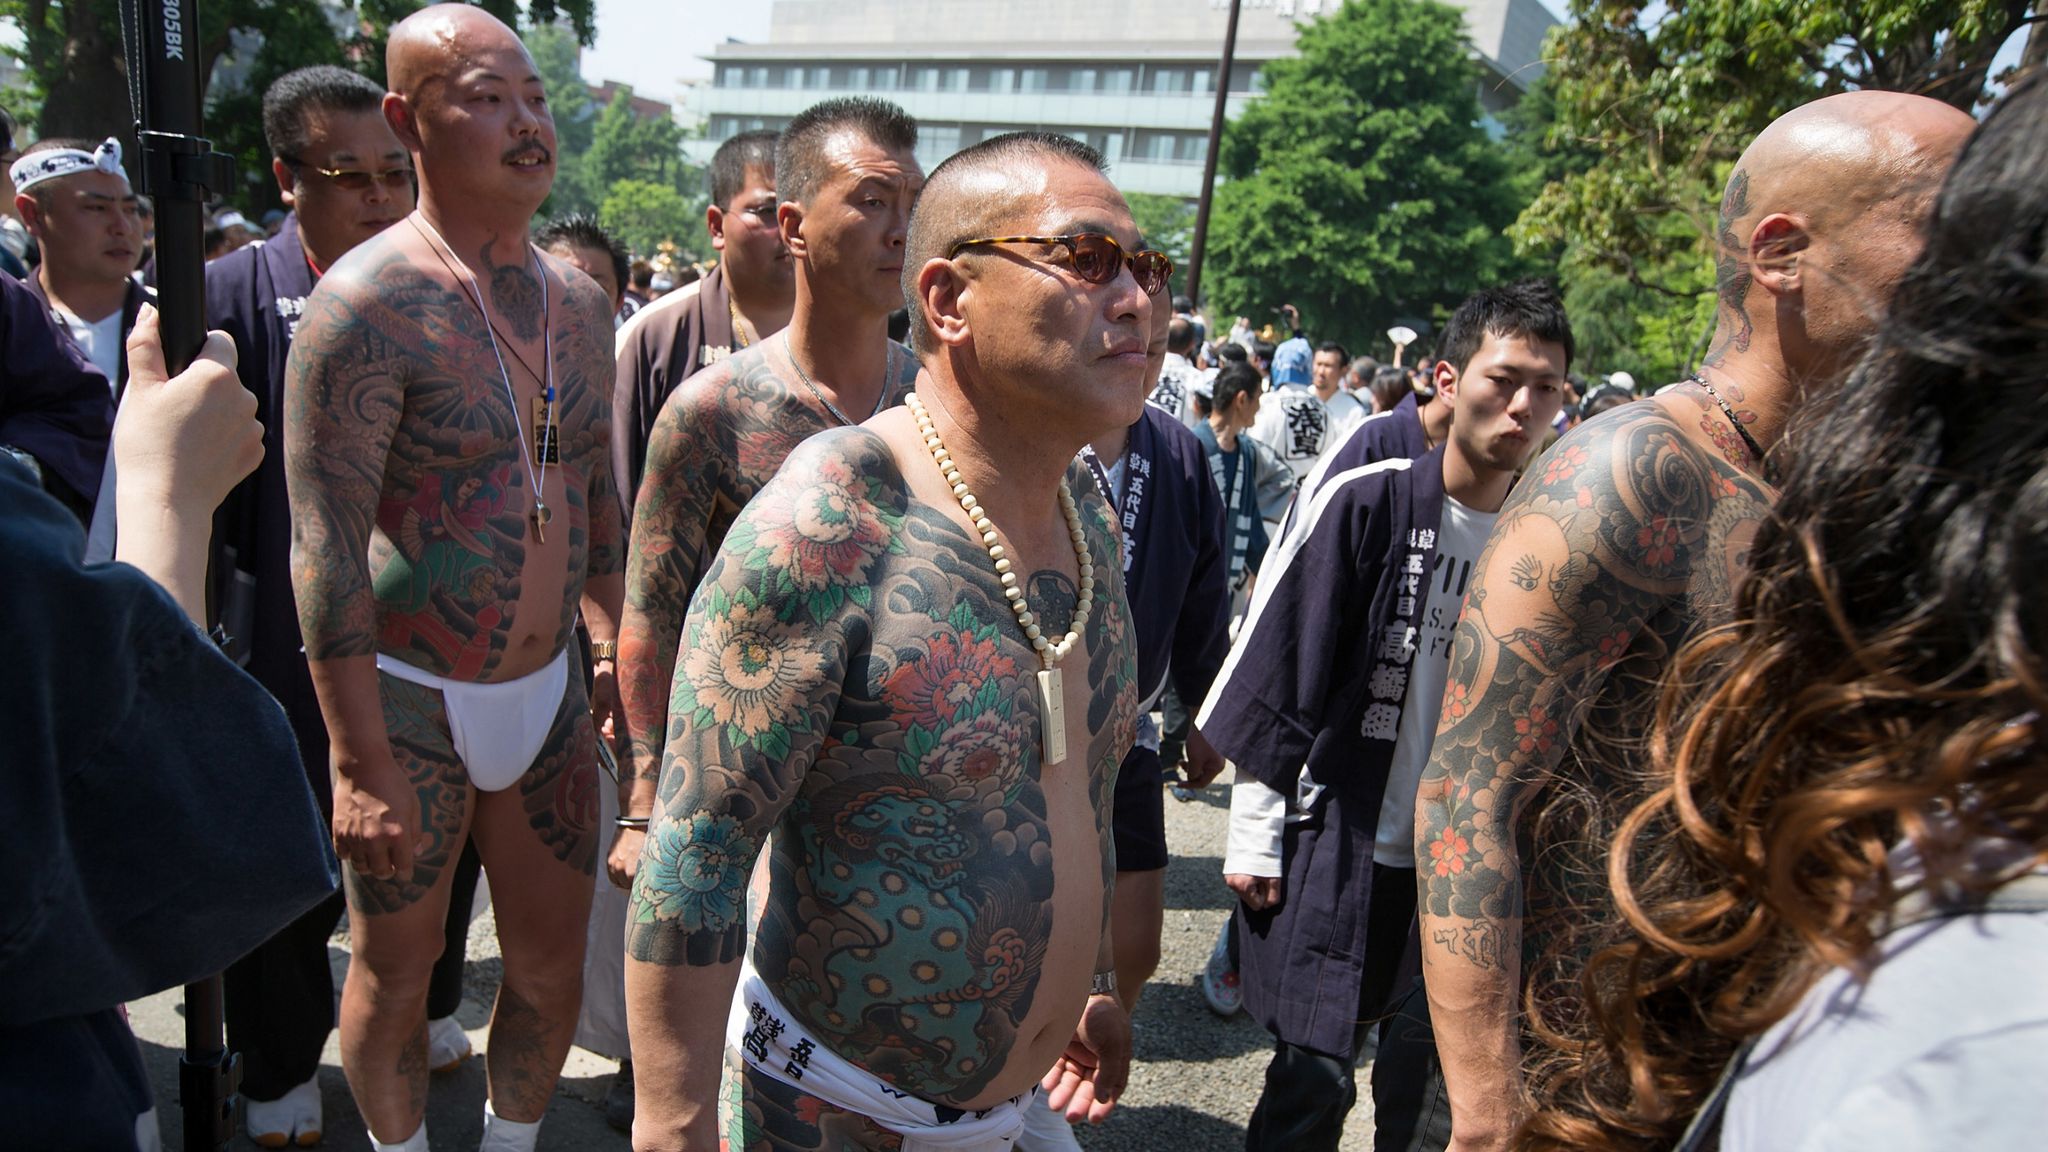 coronavirus-couldn-t-have-come-at-a-worse-time-for-japan-s-yakuza-gangs